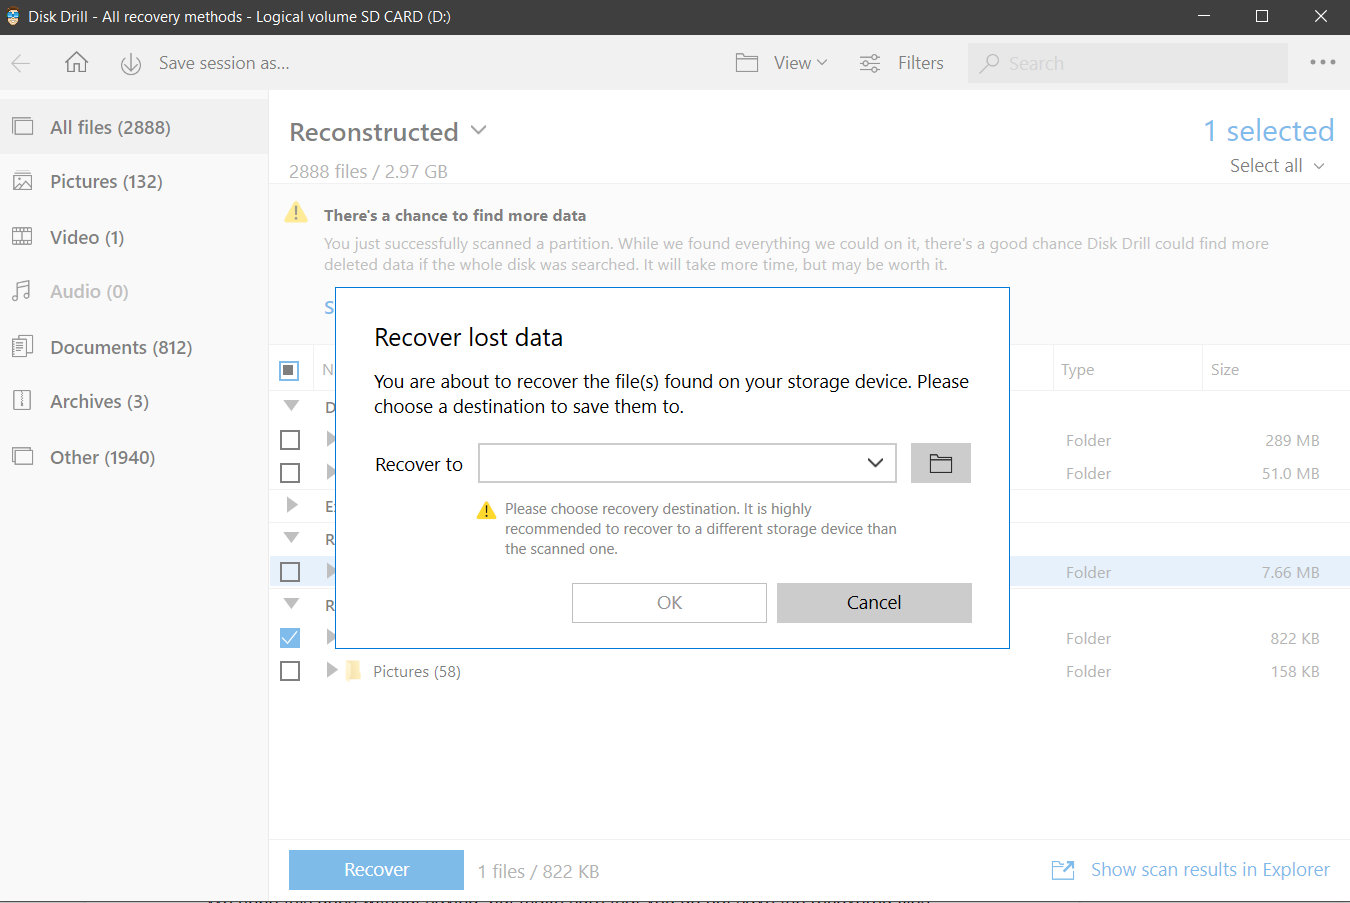 recover lost files in a different storage